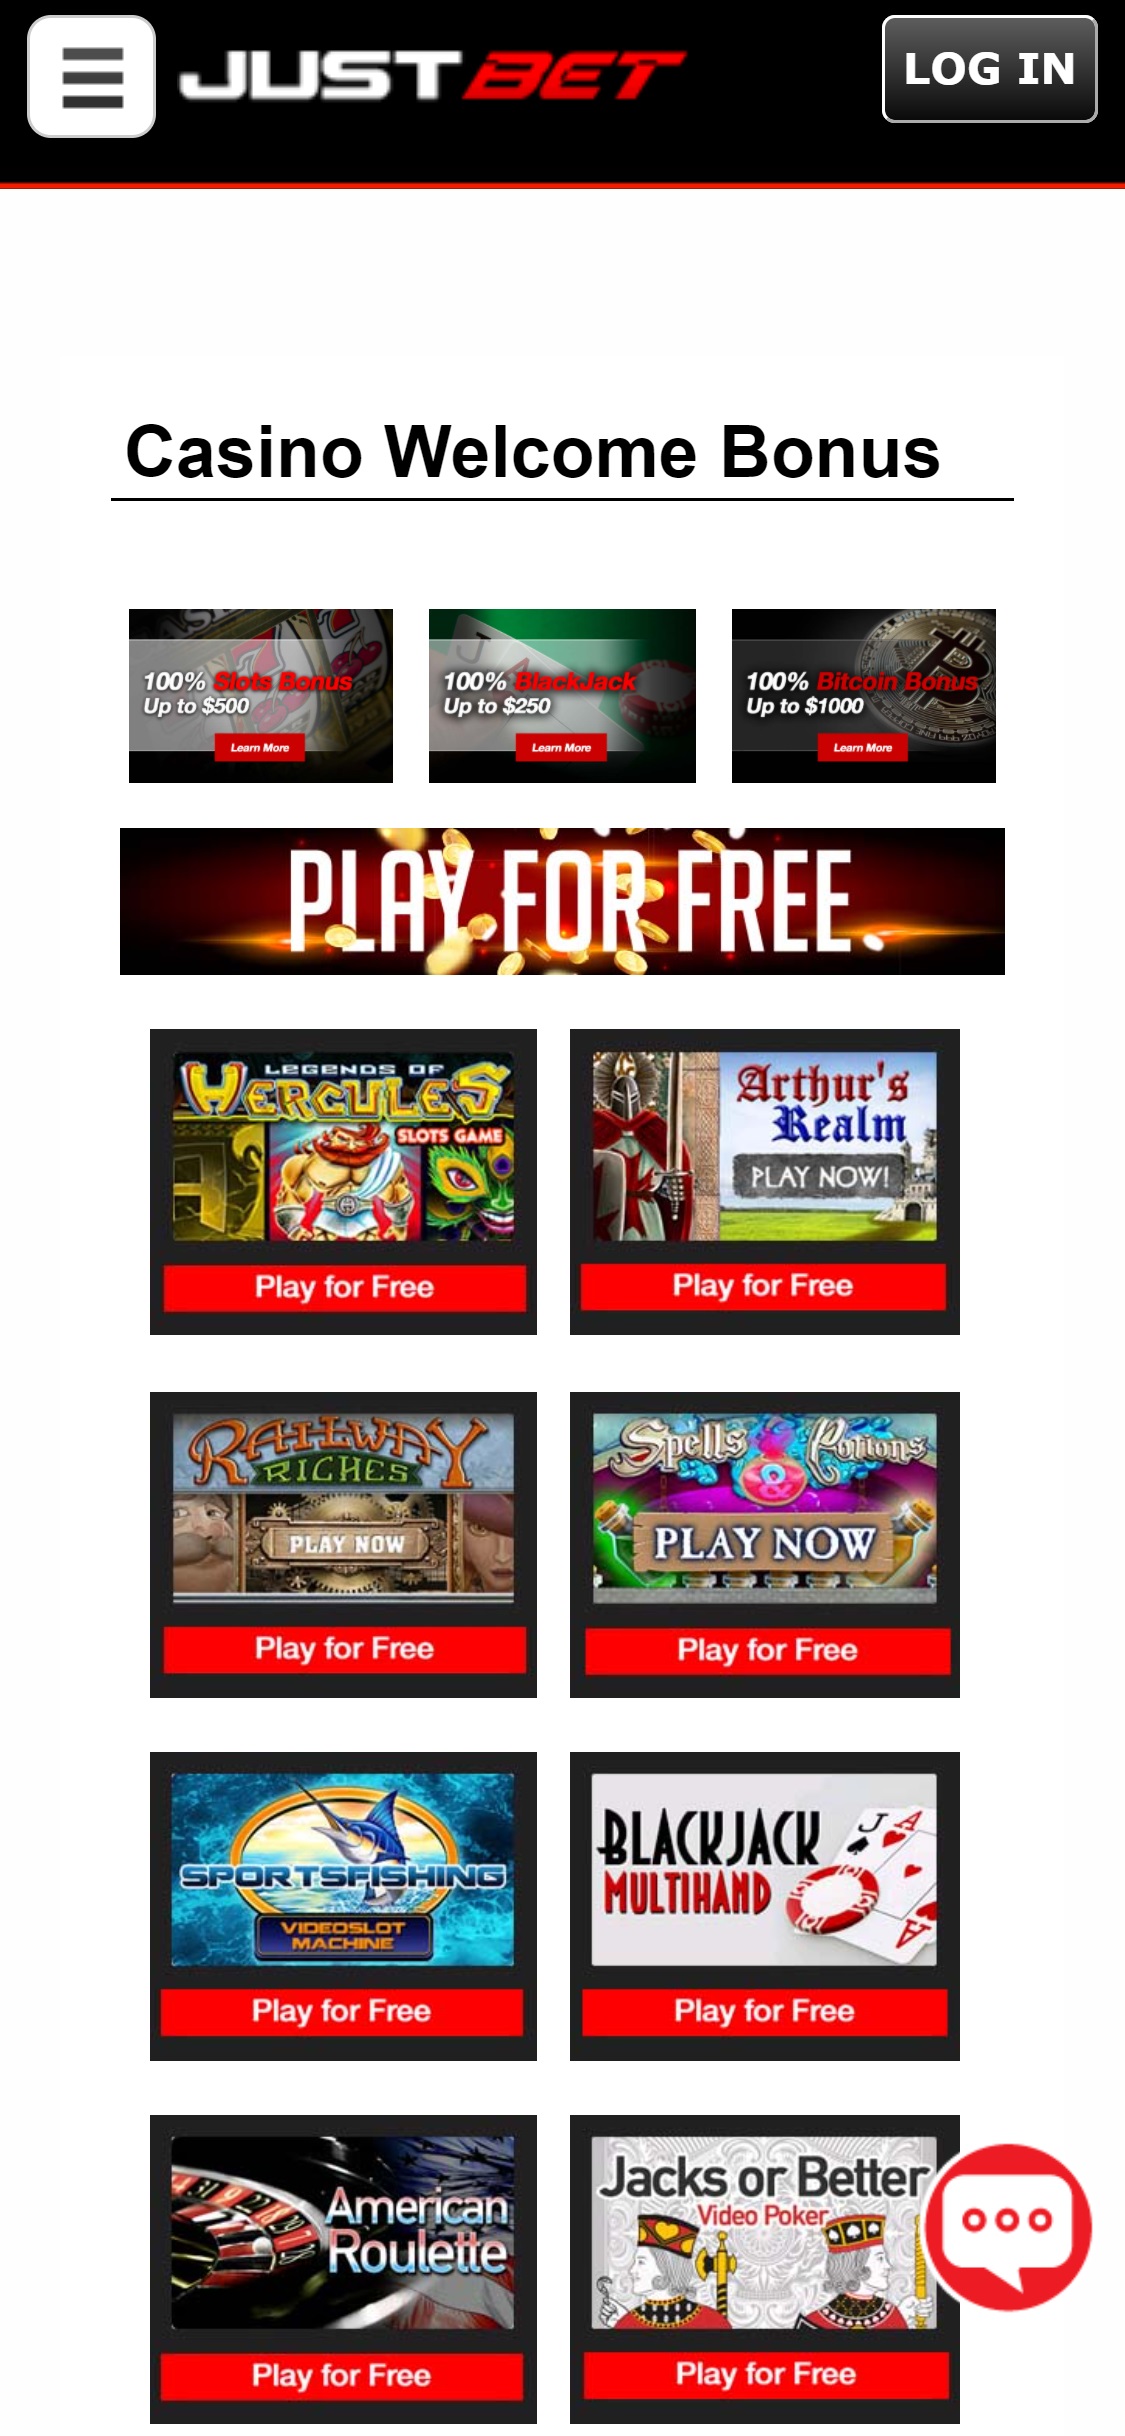 Just Bet Casino Mobile Games Review